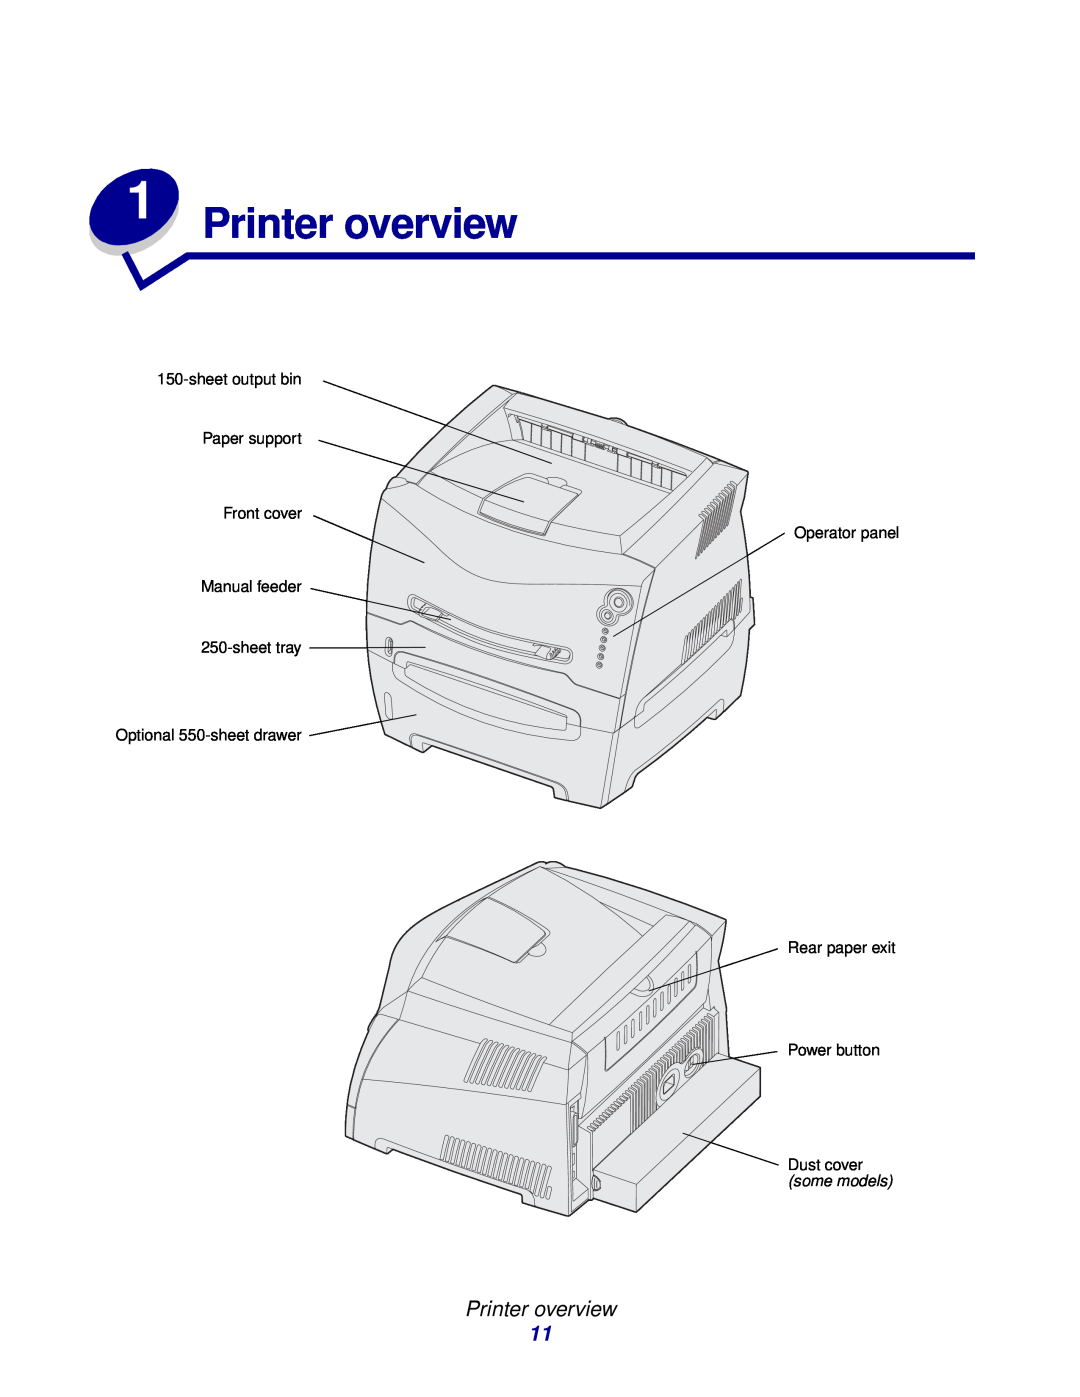 Lexmark 230, 232, E332n manual Printer overview, sheet output bin Paper support Front cover Operator panel 